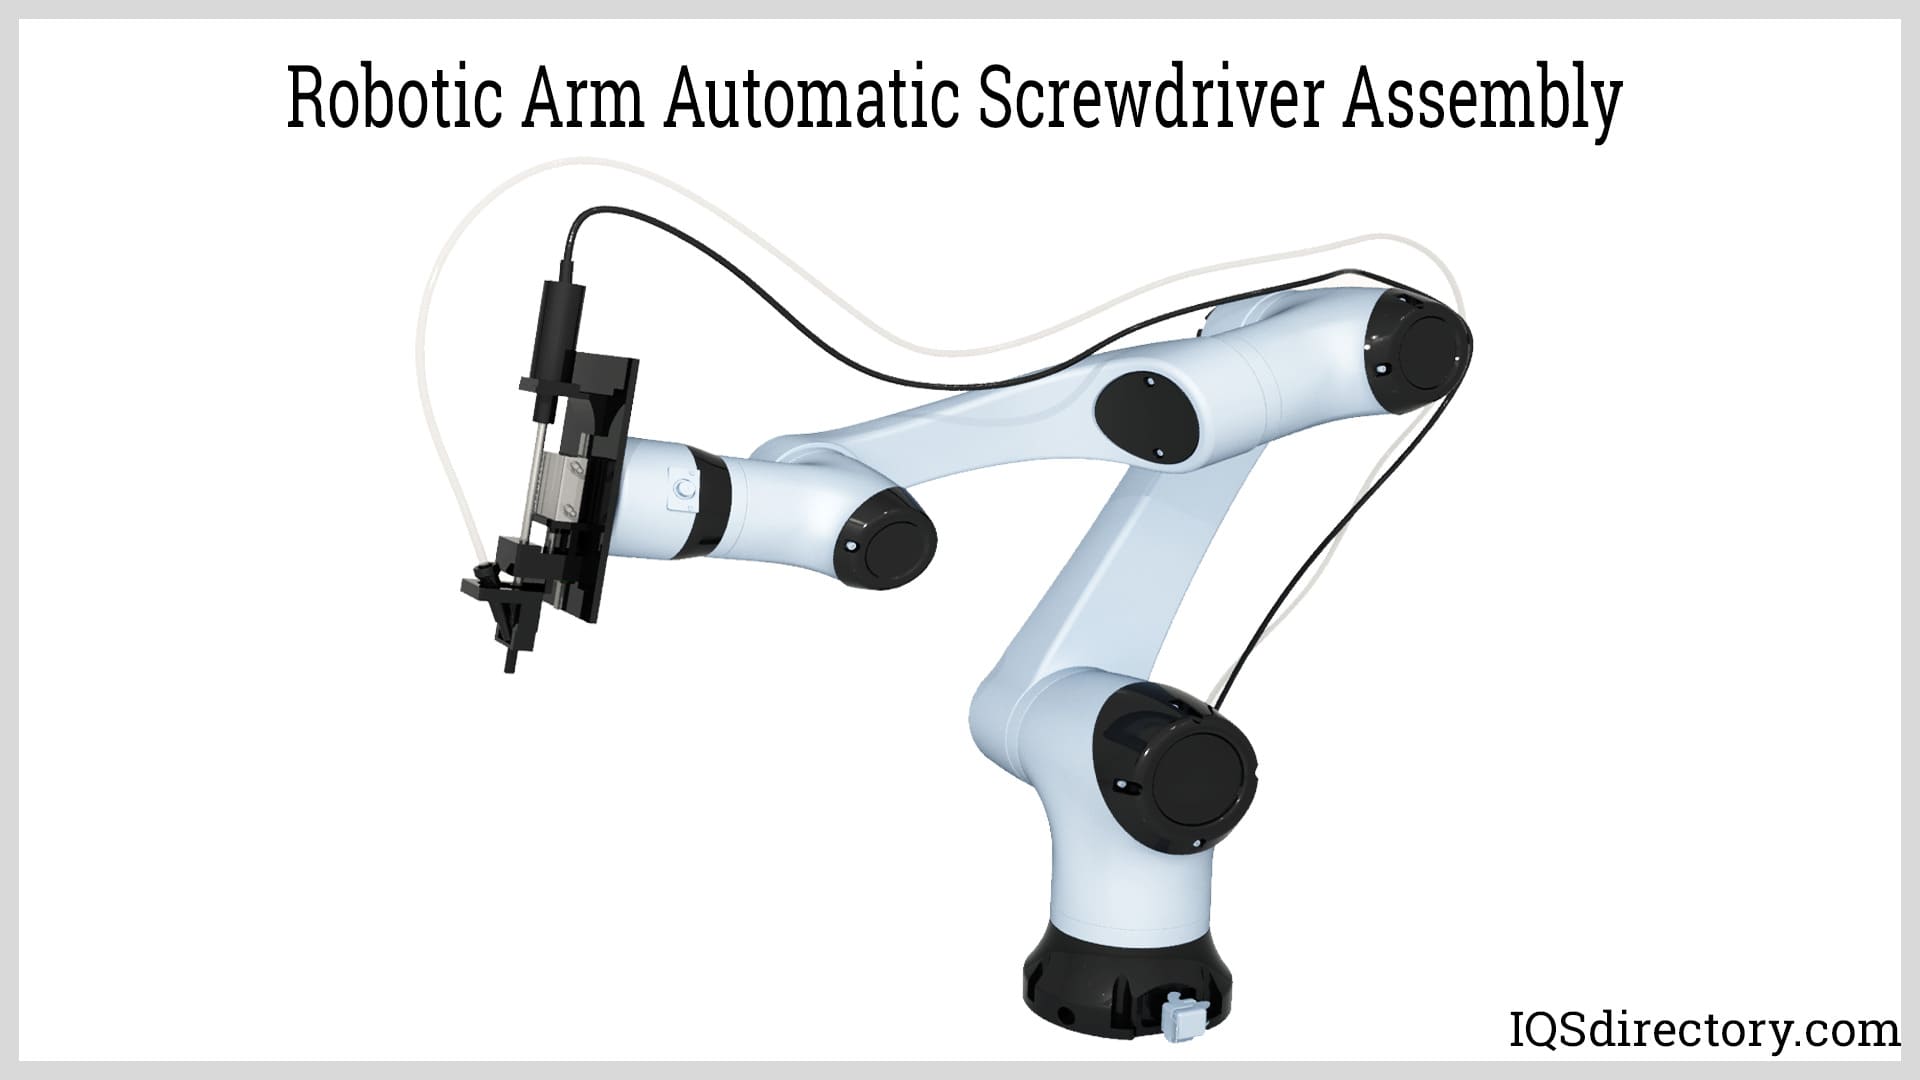 Robotic Arm Automatic Screwdriver Assembly